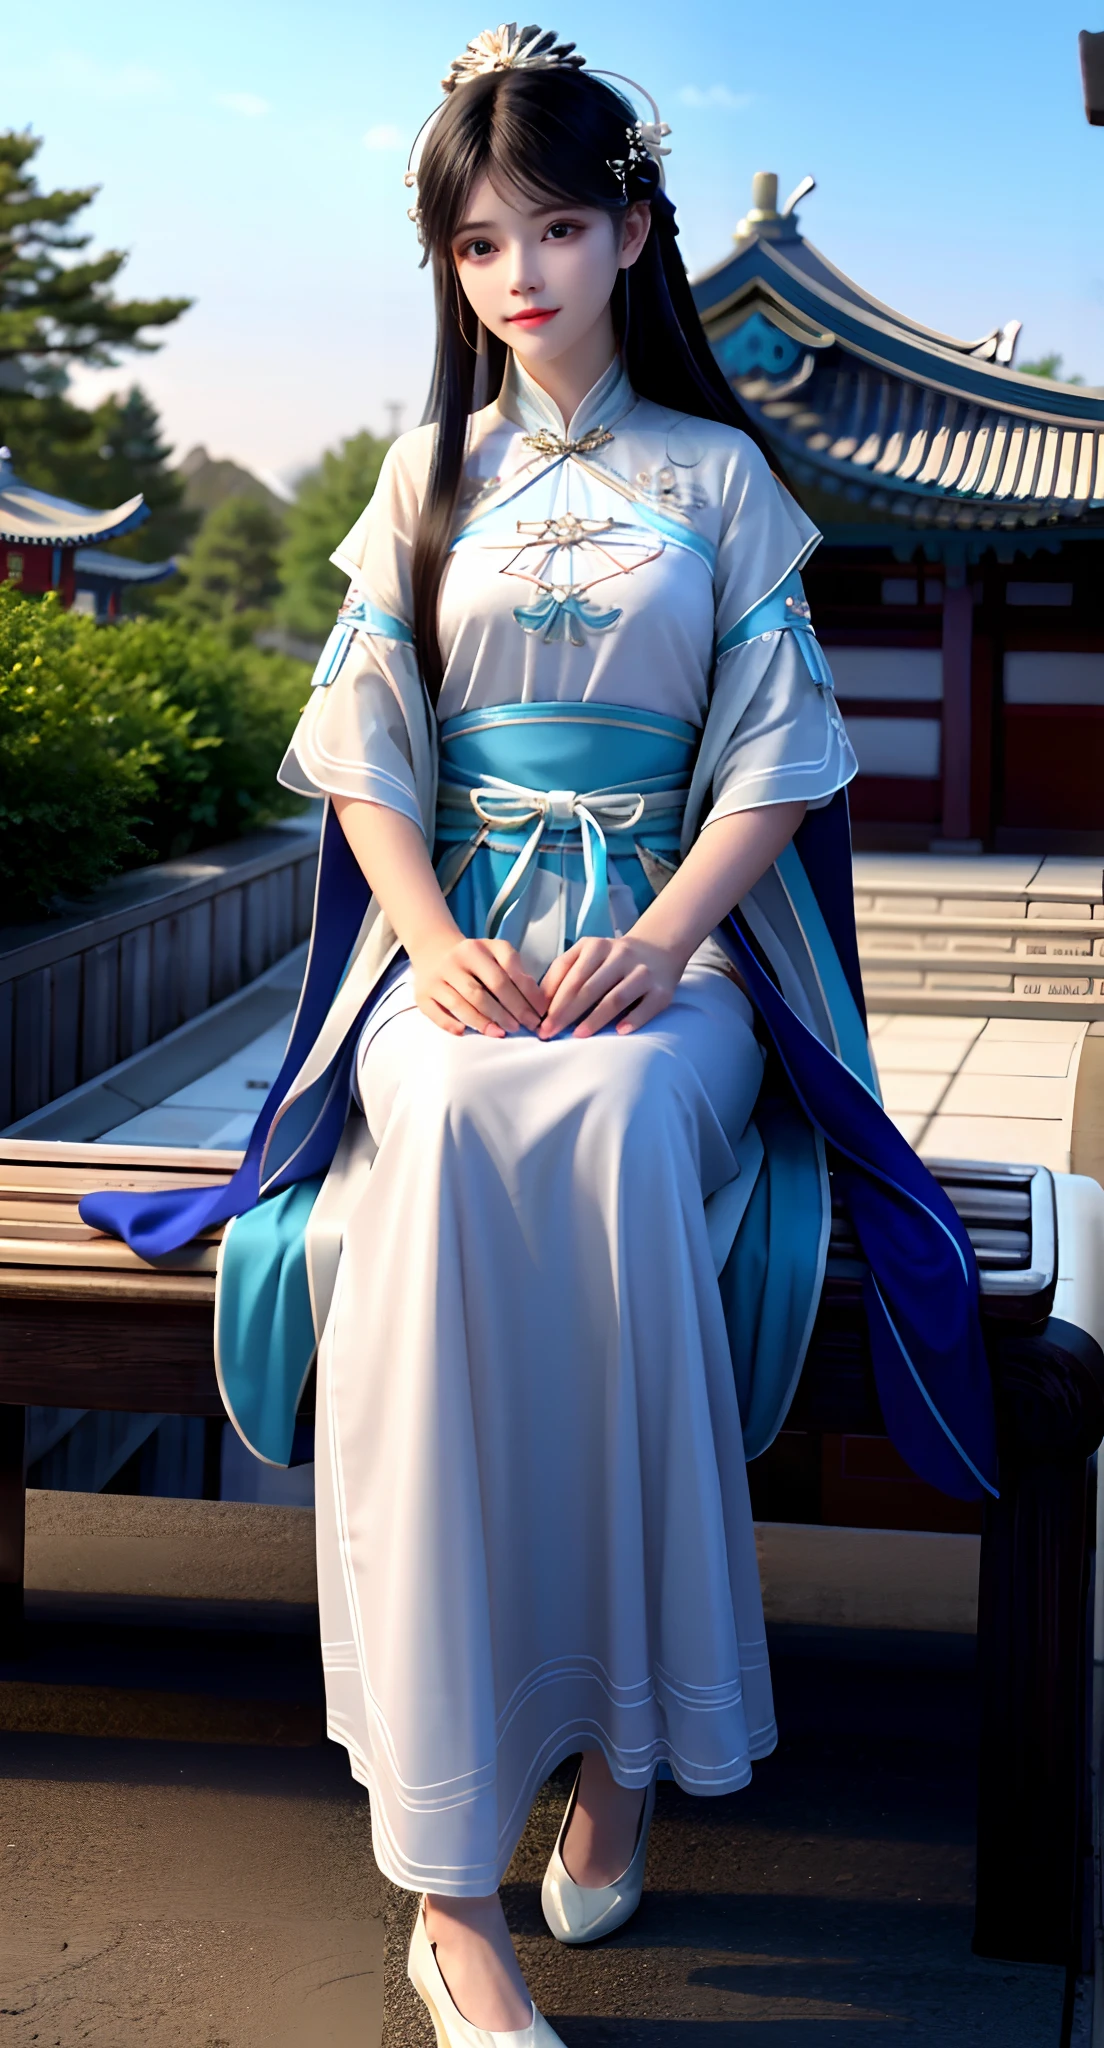 there is a woman sitting on a bench in a blue dress, Palace ， A girl in Hanfu, Hanfu, White Hanfu, Wearing ancient Chinese clothes, with acient chinese clothes, Traditional Chinese clothing, Anime girl cosplay, Chinese costume, traditional garb, Traditional clothing, Japanese clothes, traditionalcostumes, full-body xianxia, dressed with long fluent clothes